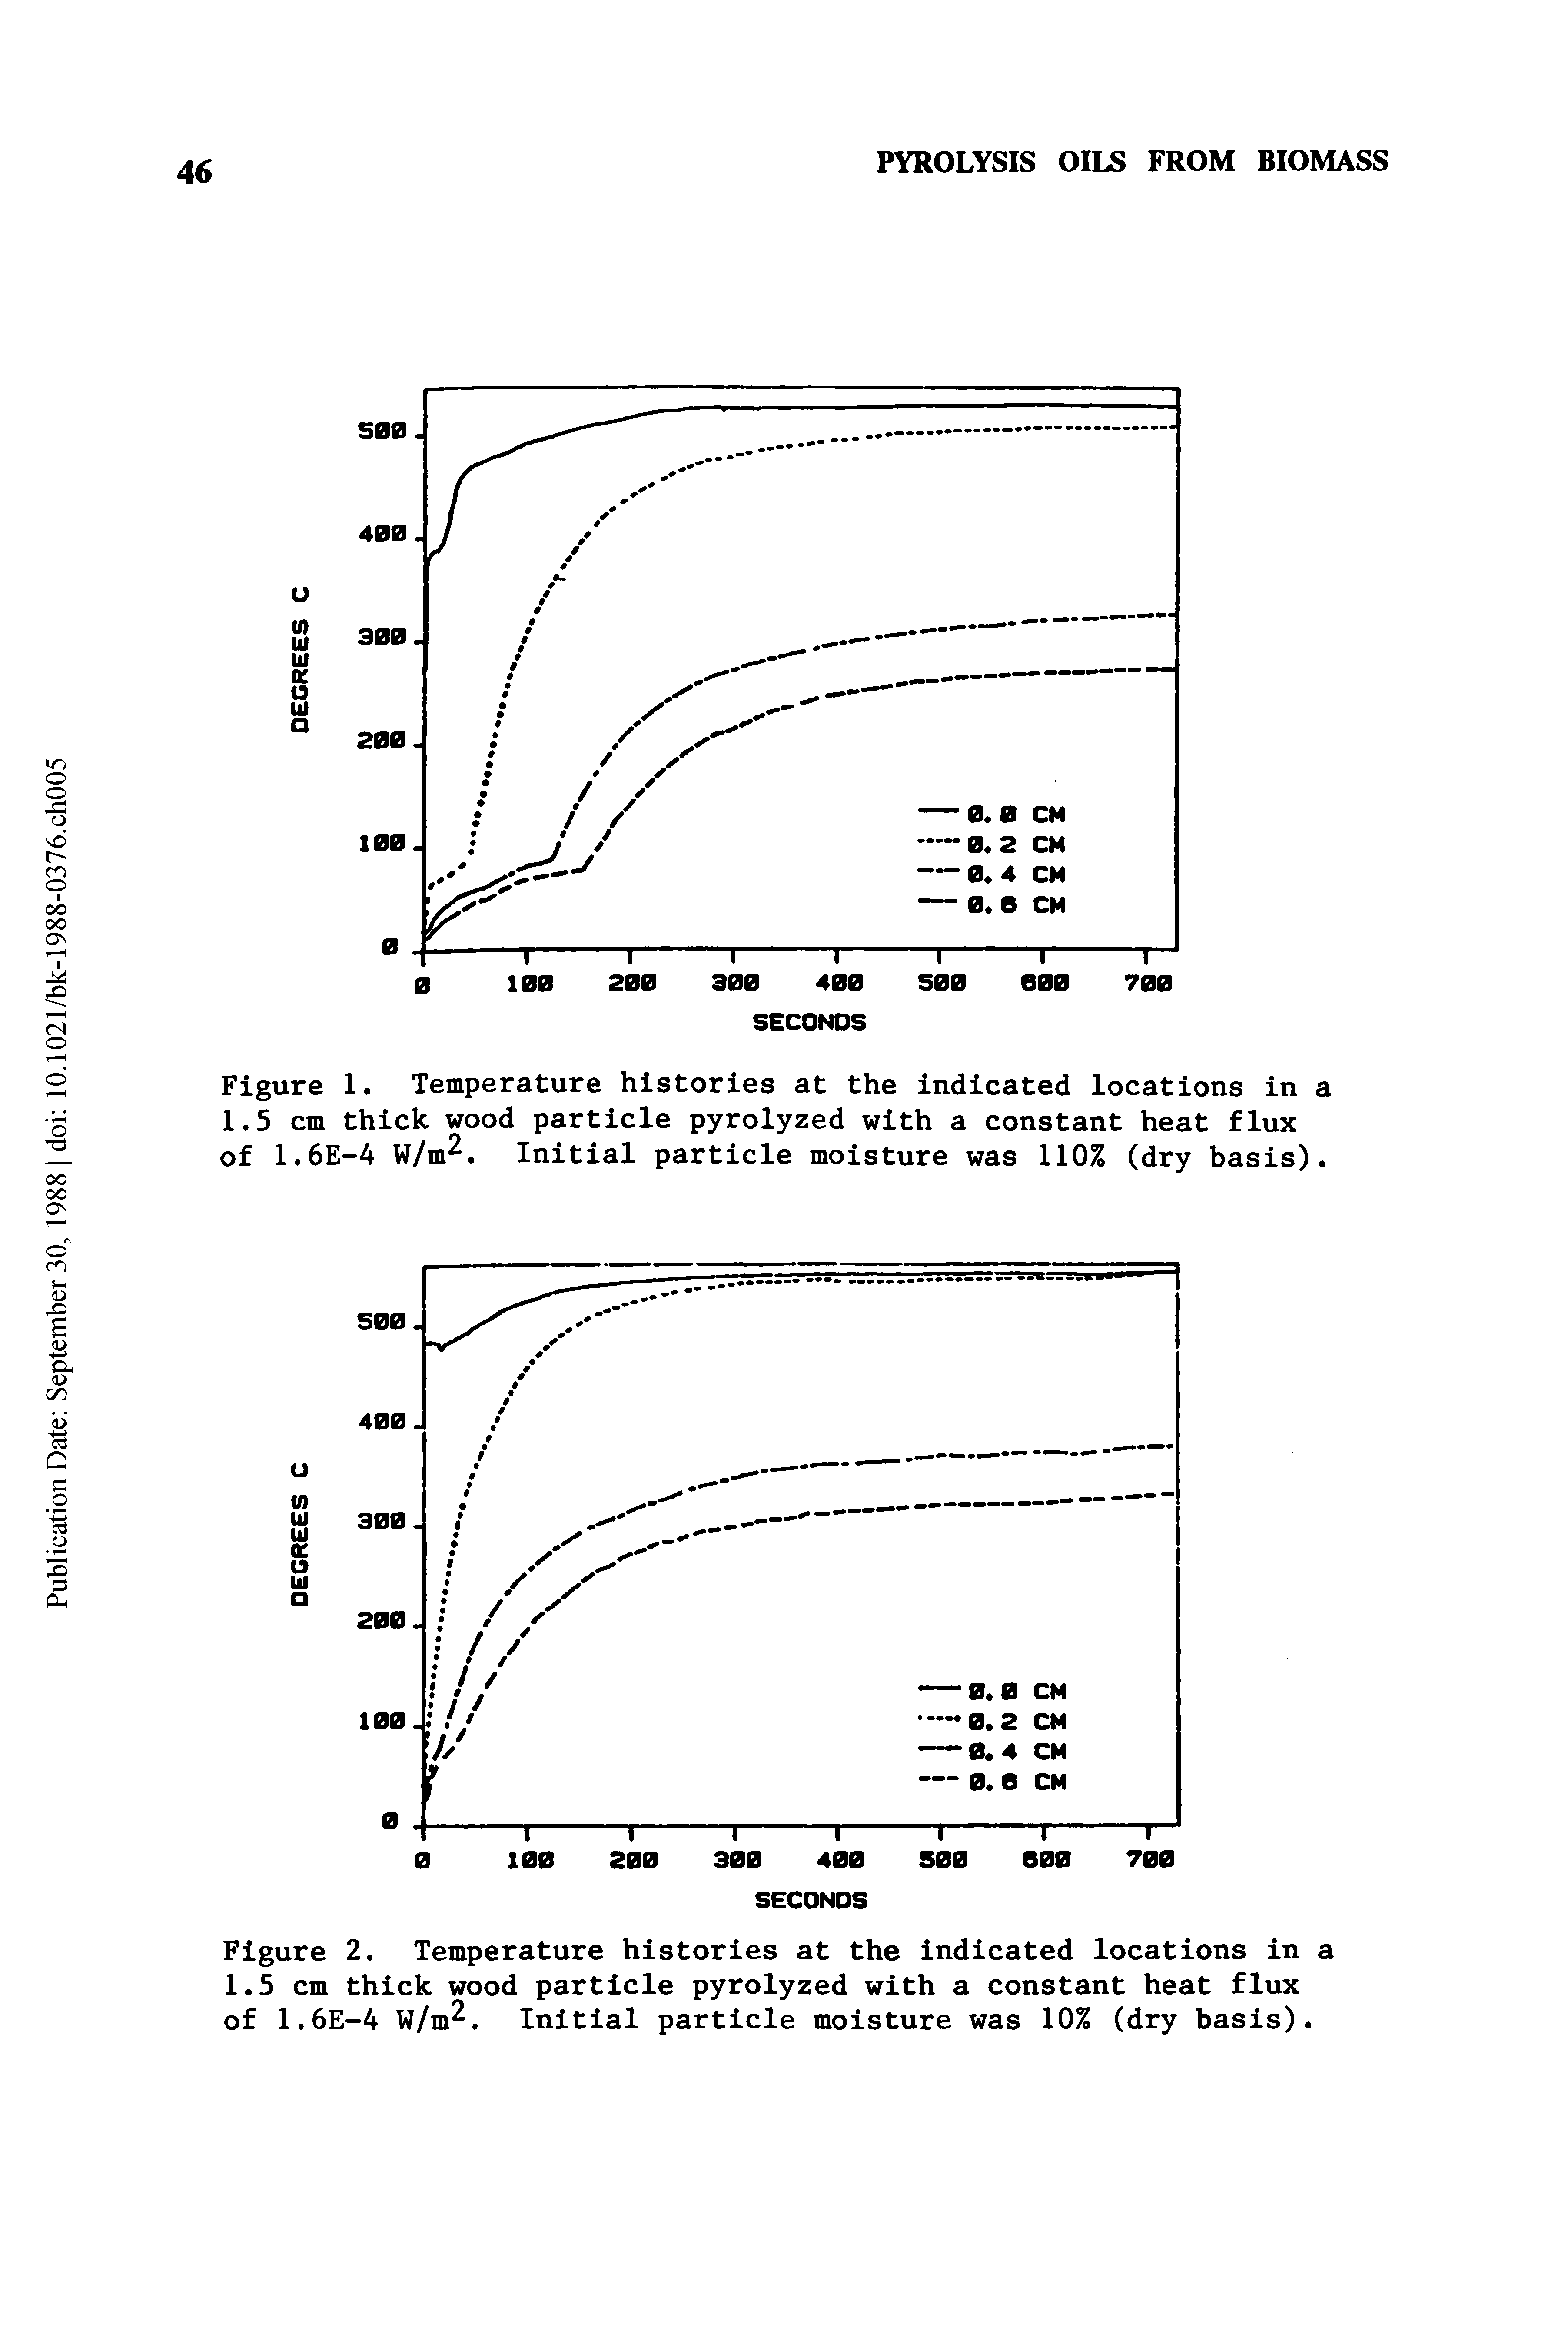 Figure 1. Temperature histories at the indicated locations in a 1.5 cm thick wood particle pyrolyzed with a constant heat flux of 1.6E-4 W/m. Initial particle moisture was 110% (dry basis).